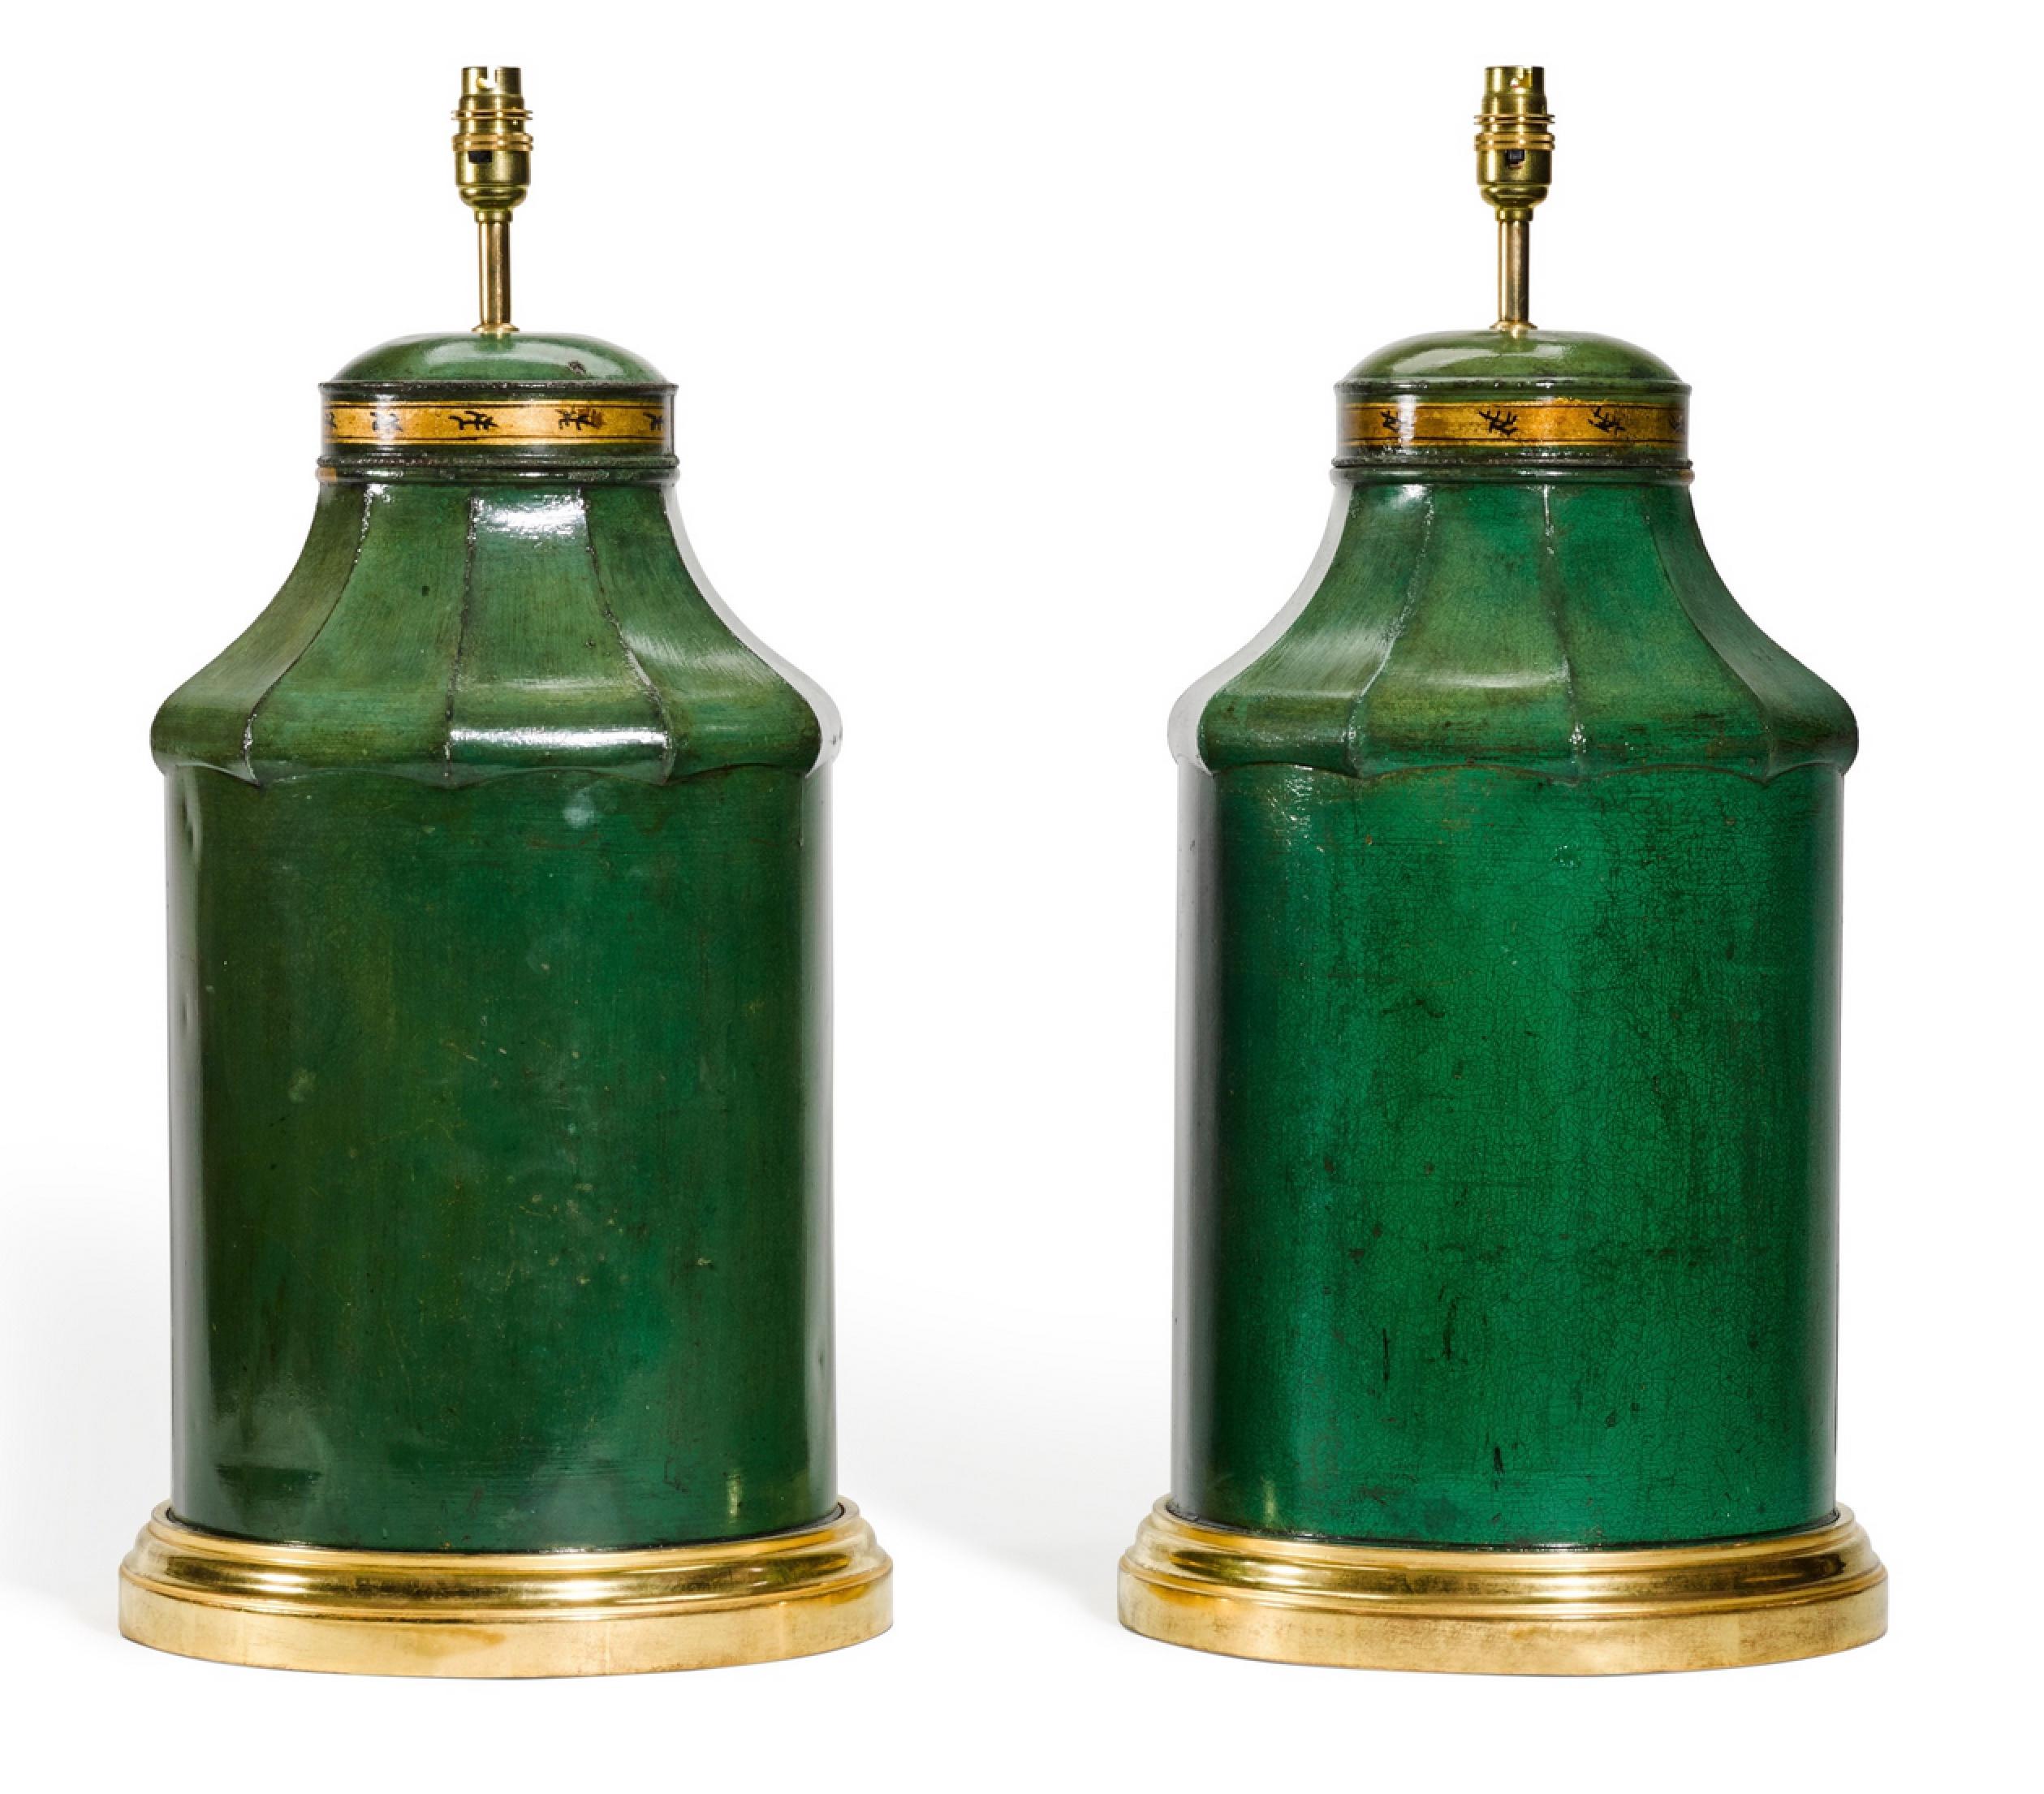 Metal Pair of Gold and Green 19th Century Tea Canister Antique Table Lamps For Sale